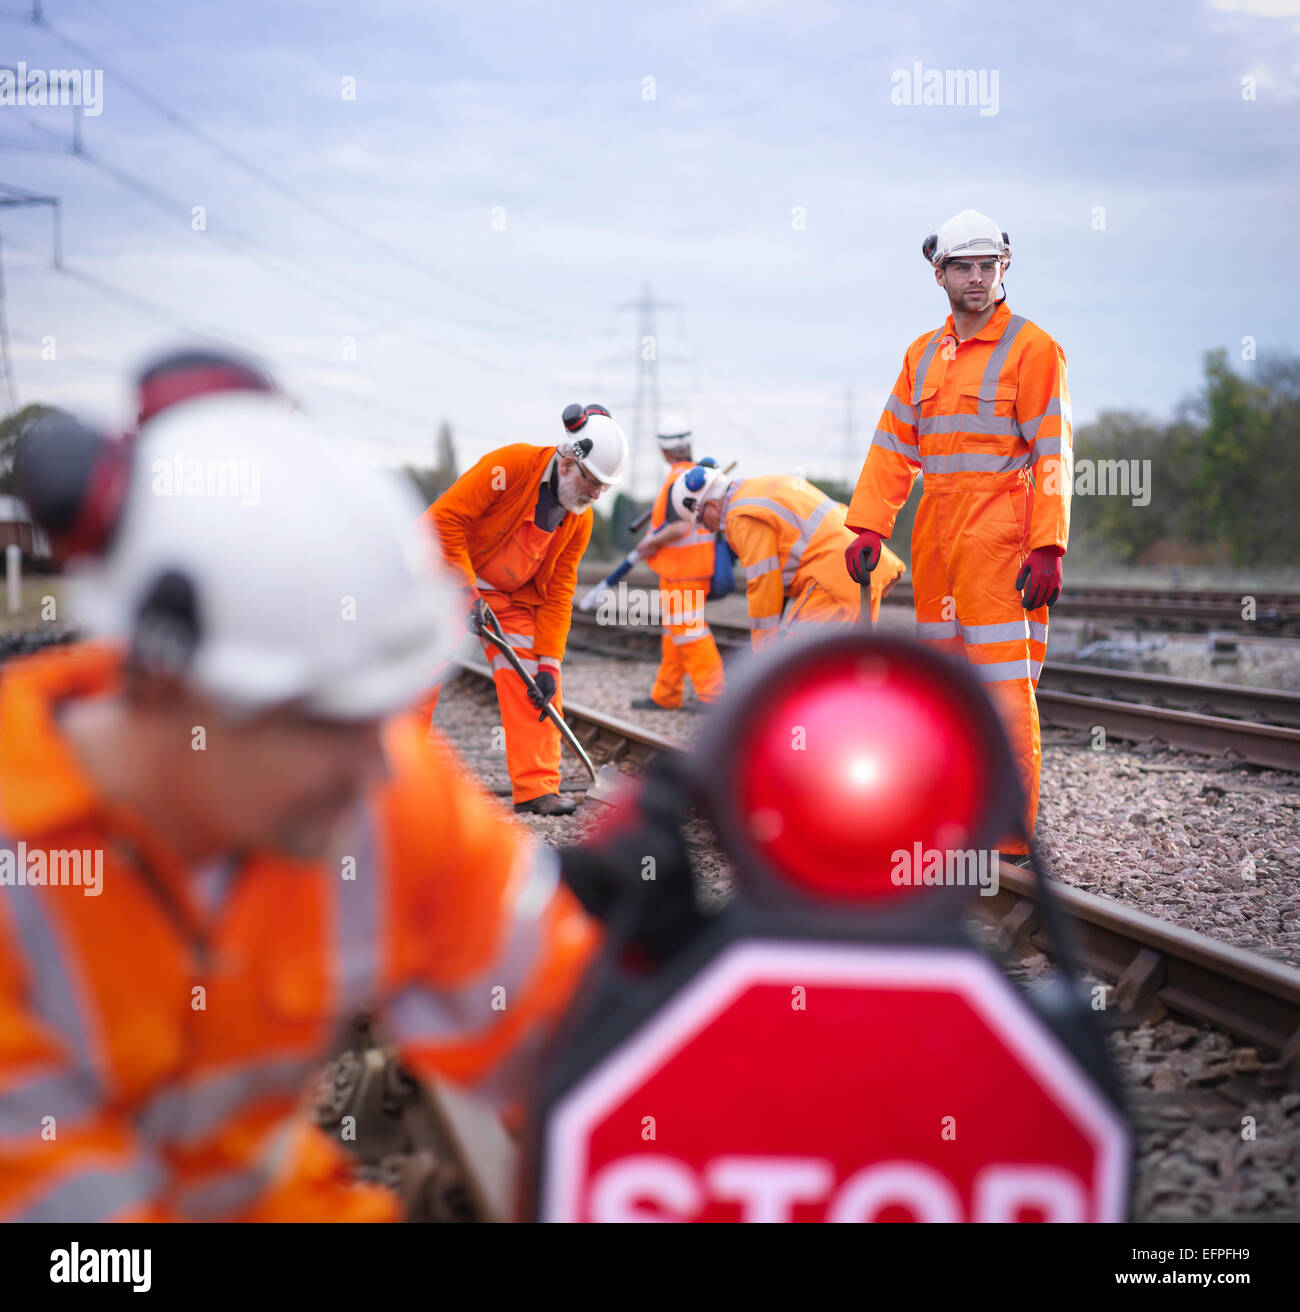 Railway maintenance workers on track with stop sign Stock Photo